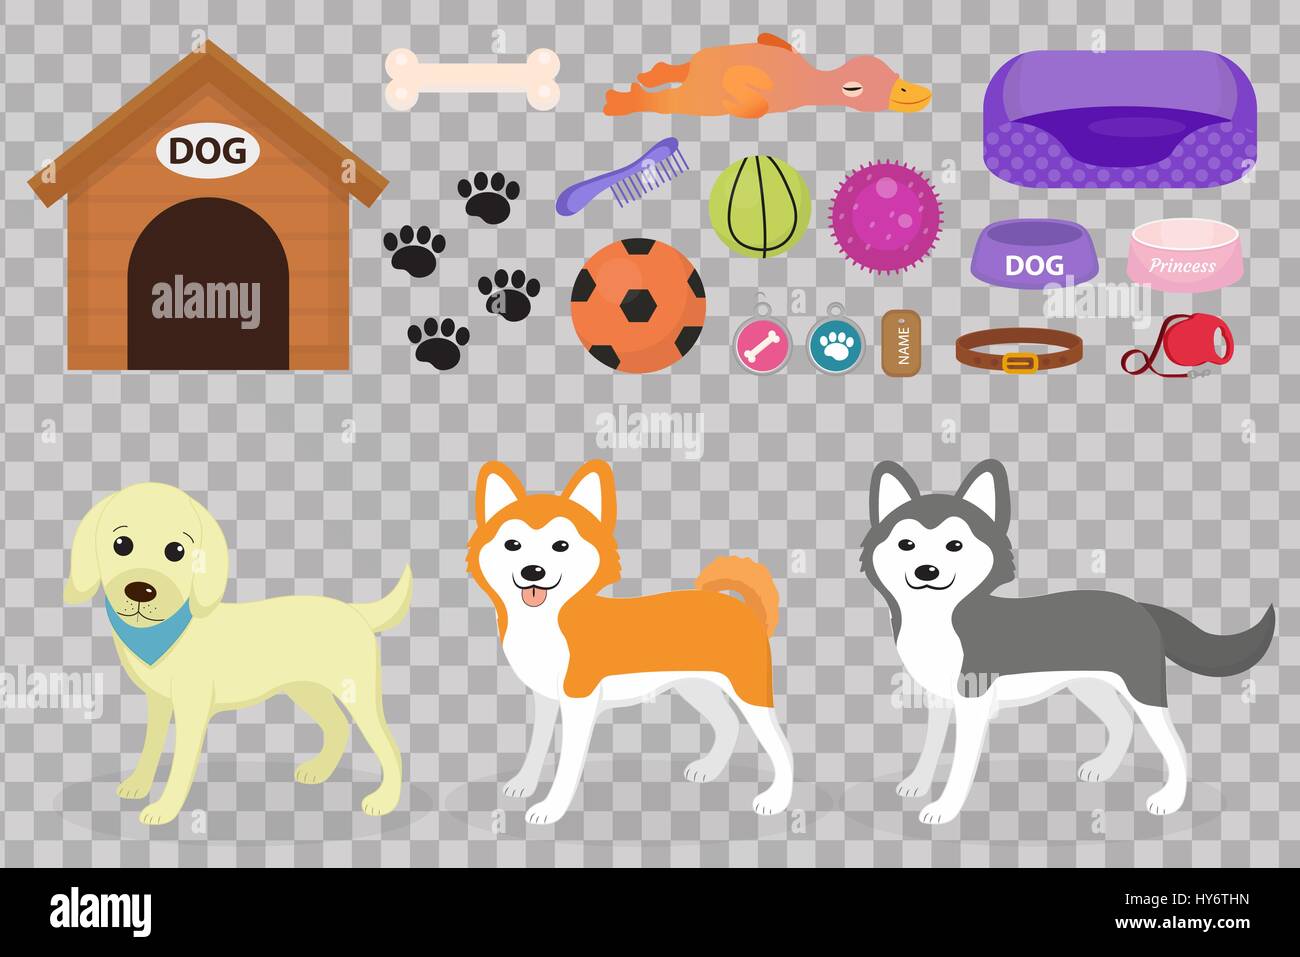 Dogs stuff icon set with accessories for pets, flat style, isolated on white background. Domestic animals collection with a Husky, akita inu, lablador. Puppy toy. Vector illustration, clip art. Stock Vector